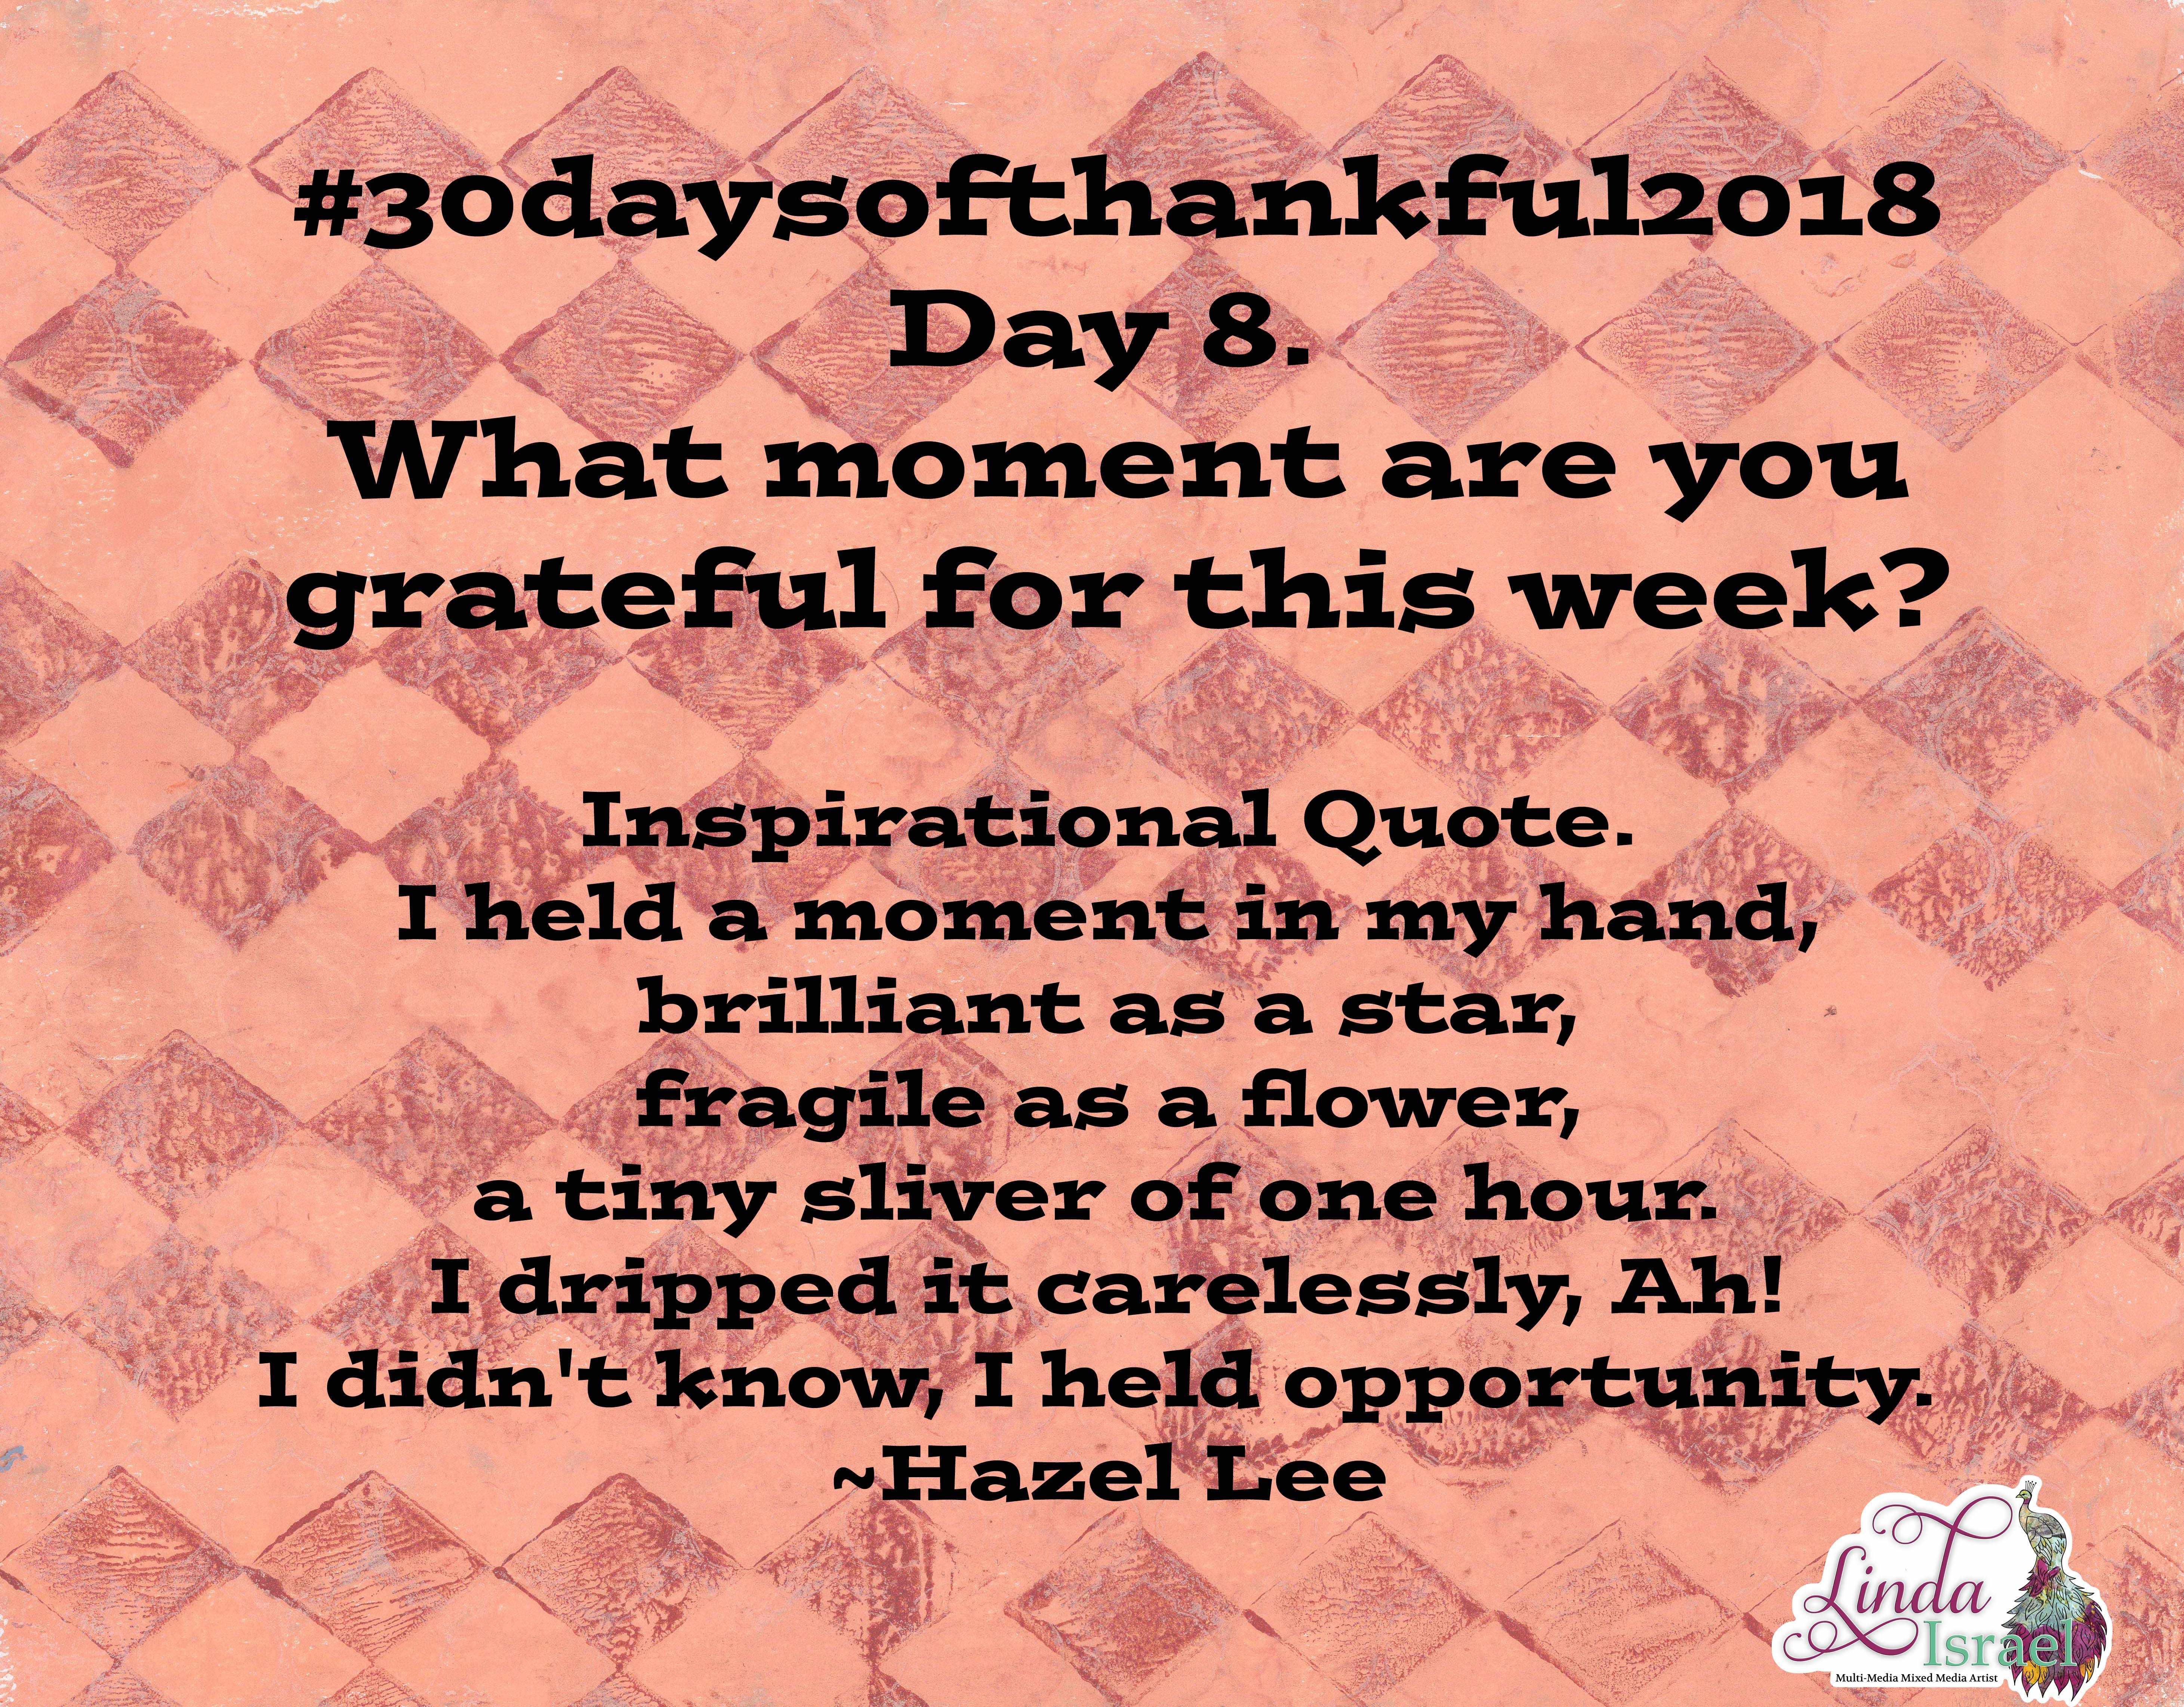 Day 8 of 30 days of Thankful 2018